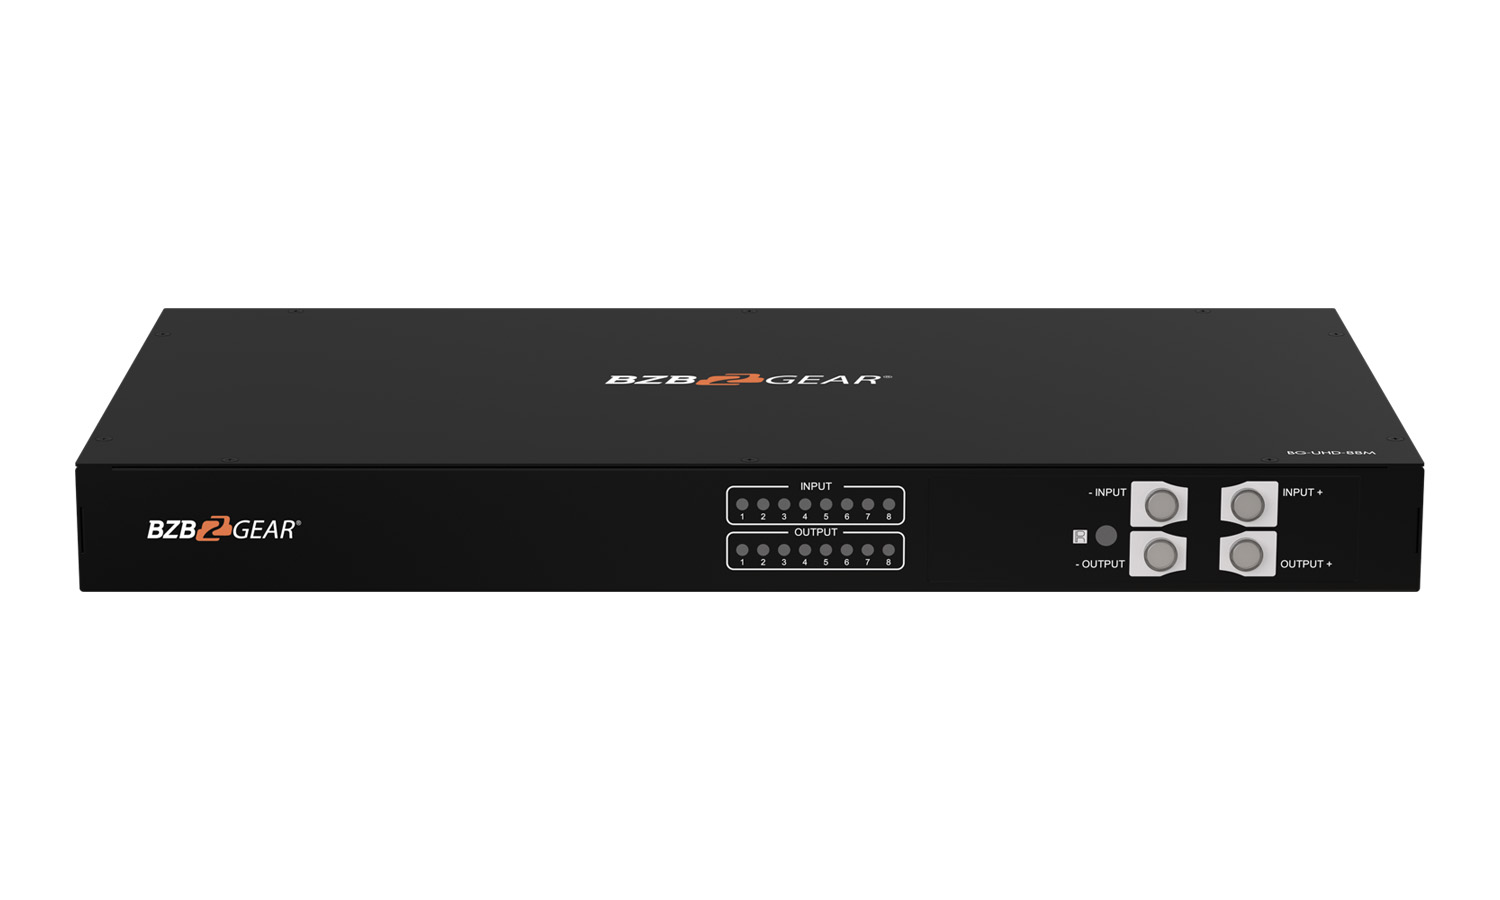 BG-UHD-88M 8x8 4K UHD HDMI 18Gbps Matrix with Audio Extraction/ARC/Downscaling Support by BZBGEAR